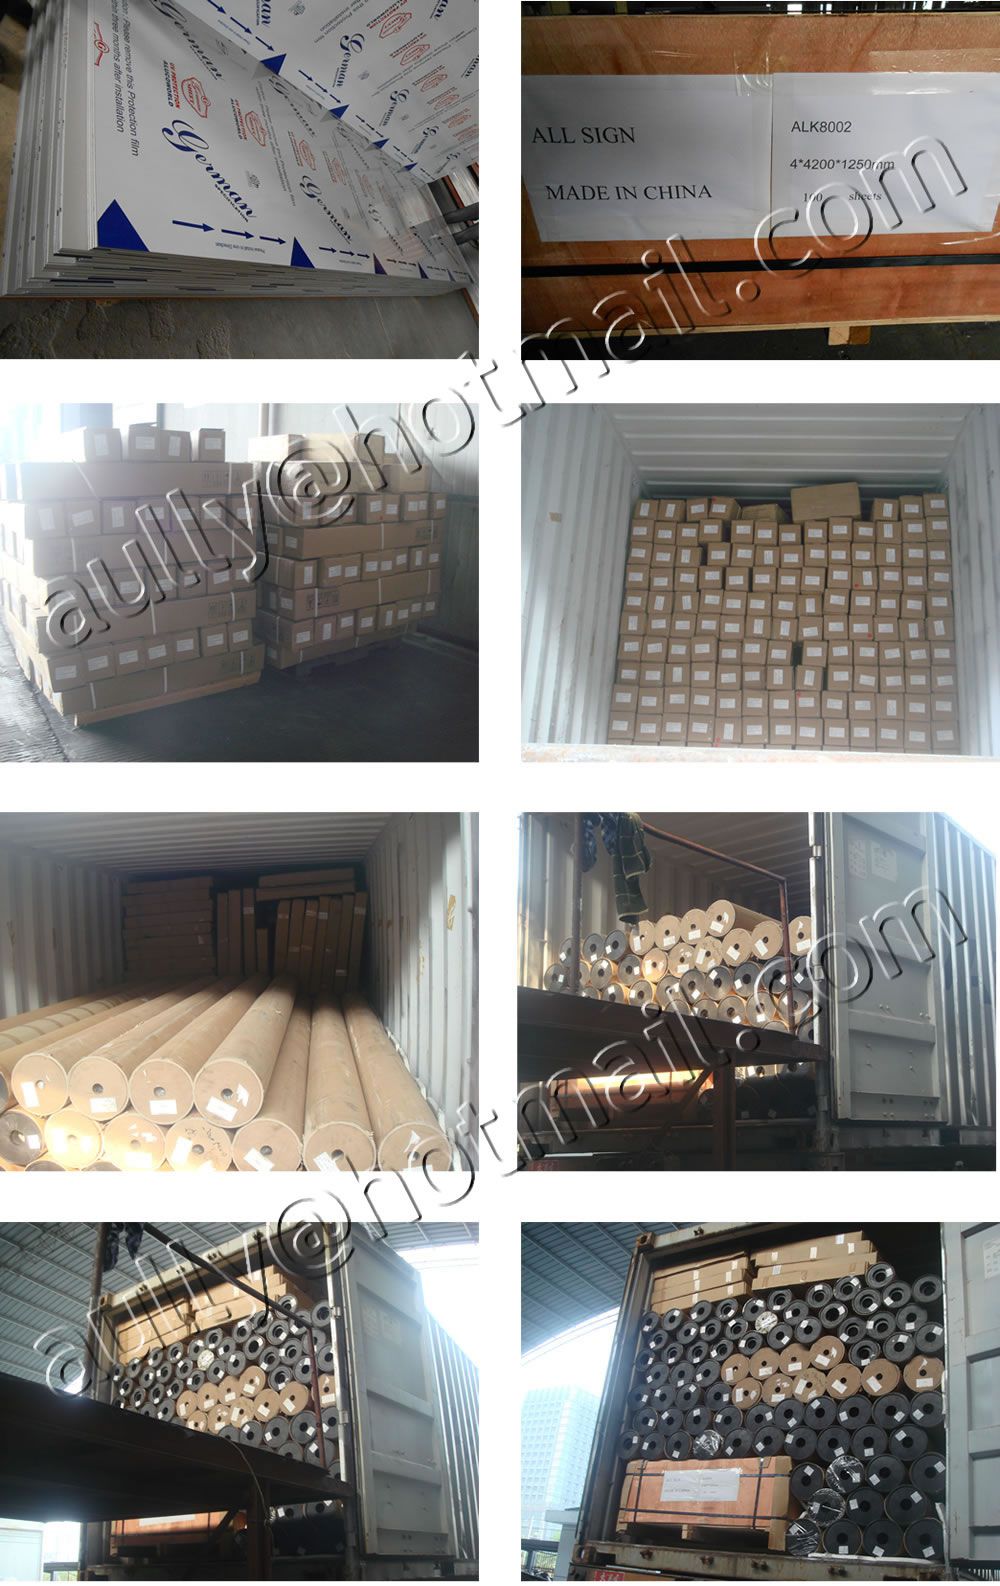 AS130813IV (Printing Materials/ LED / Display Stands) to Cote divoire